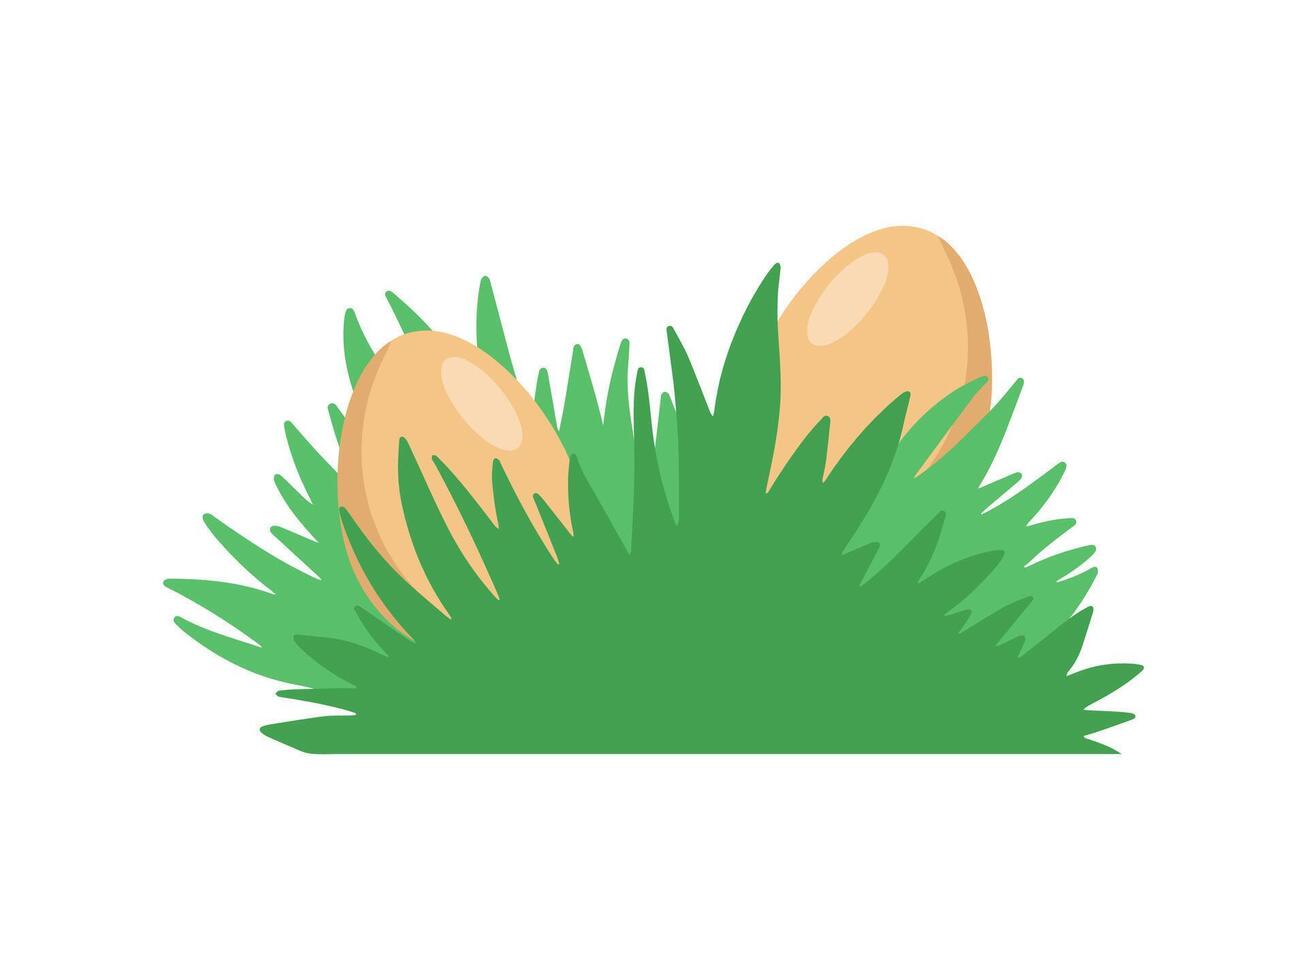 Easter Eggs Background Lying in Grass vector